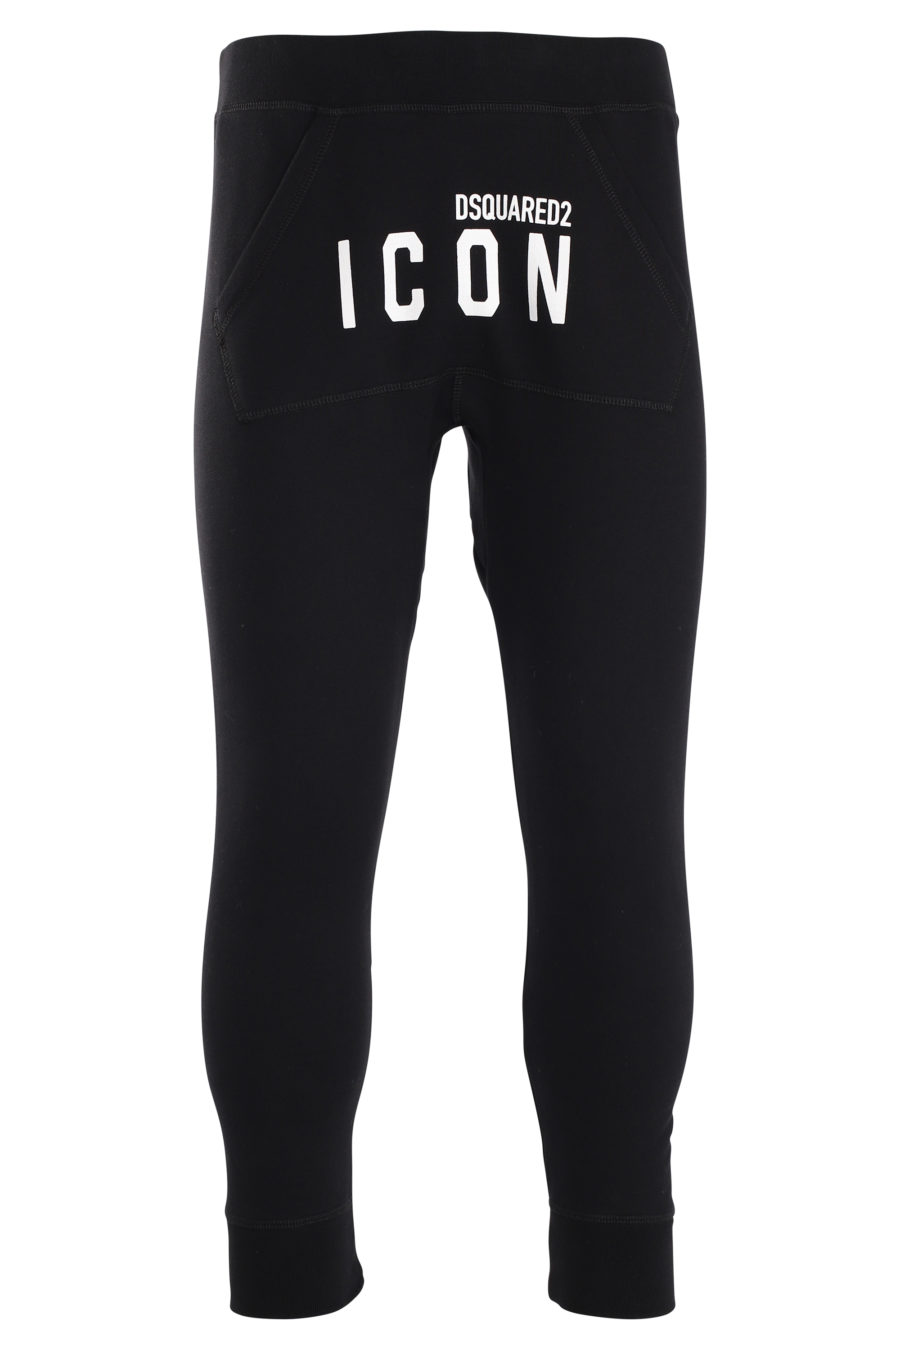 Tracksuit bottoms black with front "icon" logo - IMG 0015